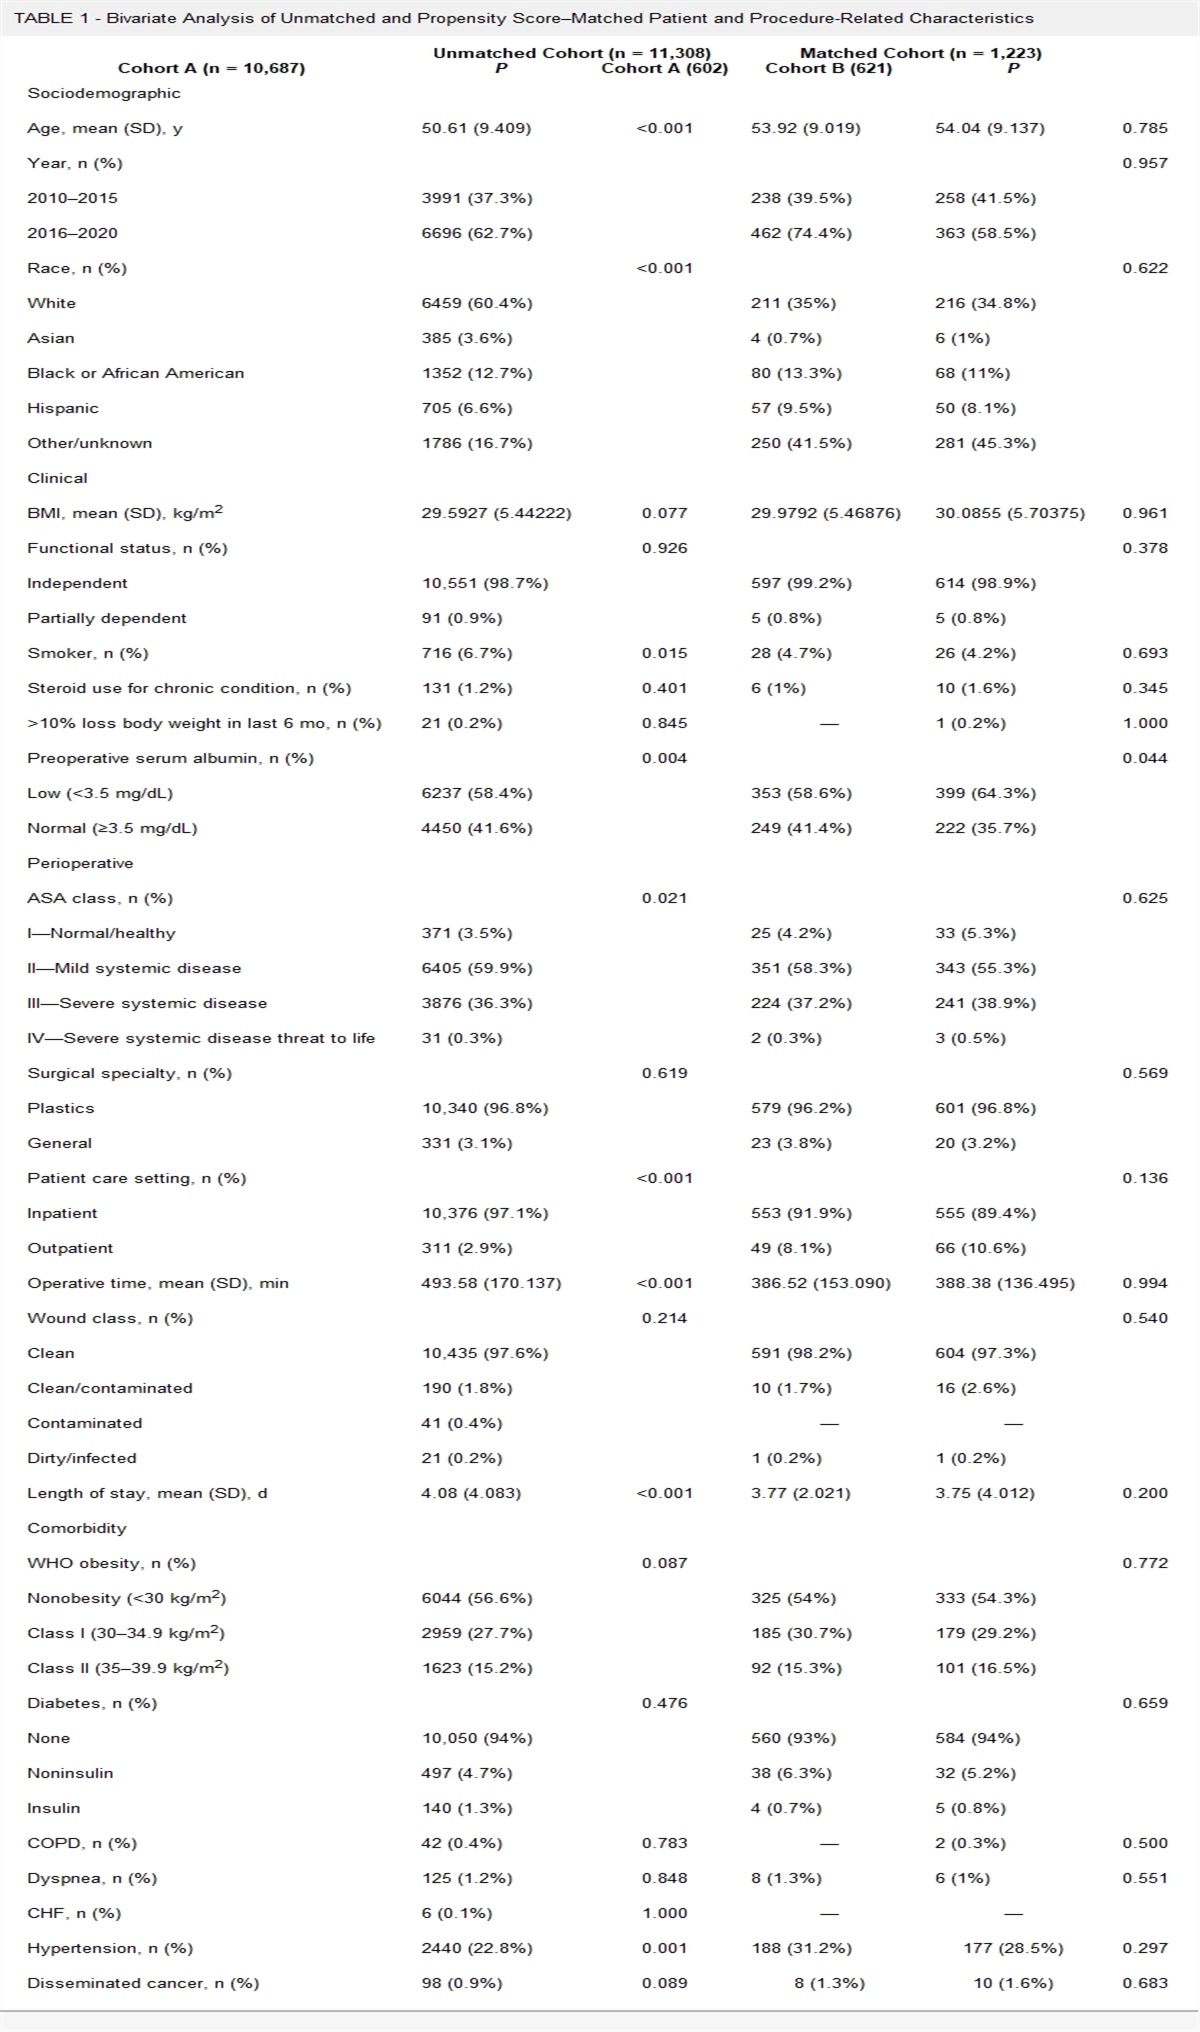 Simultaneous Free Flap Breast Reconstruction Combined With Contralateral Mastopexy or Breast Reduction: A Propensity-Matched National Surgical Quality Improvement Program Study on Postoperative Outcomes